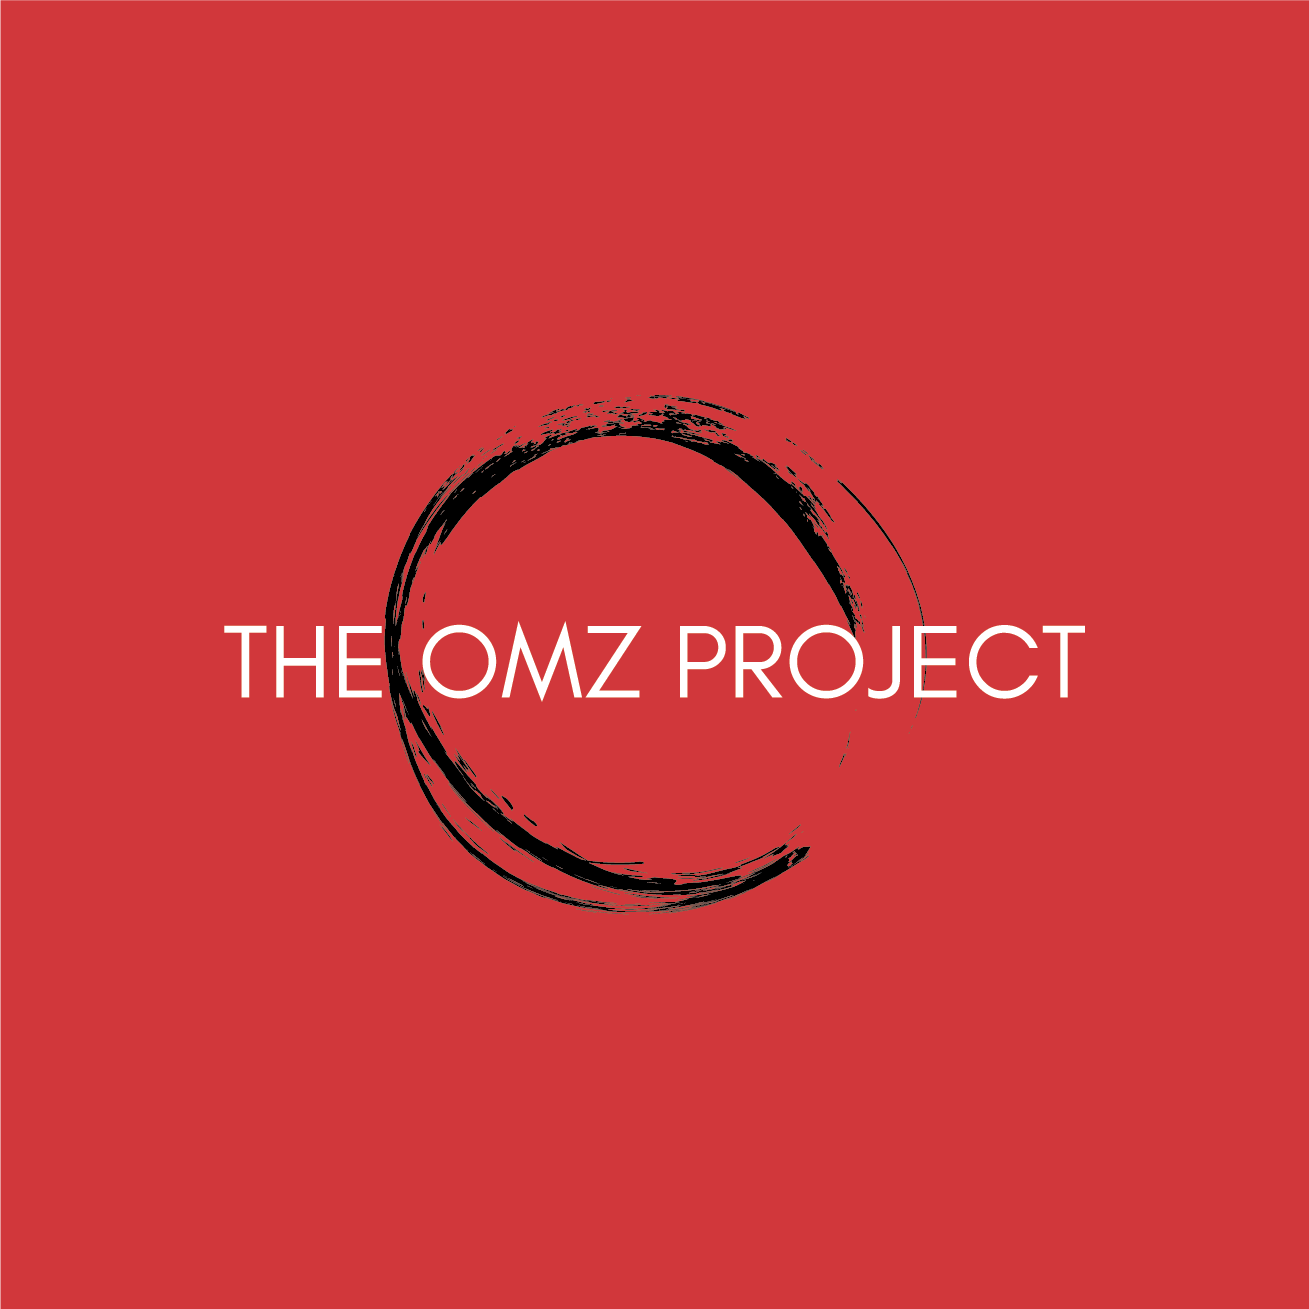 The Omz Project